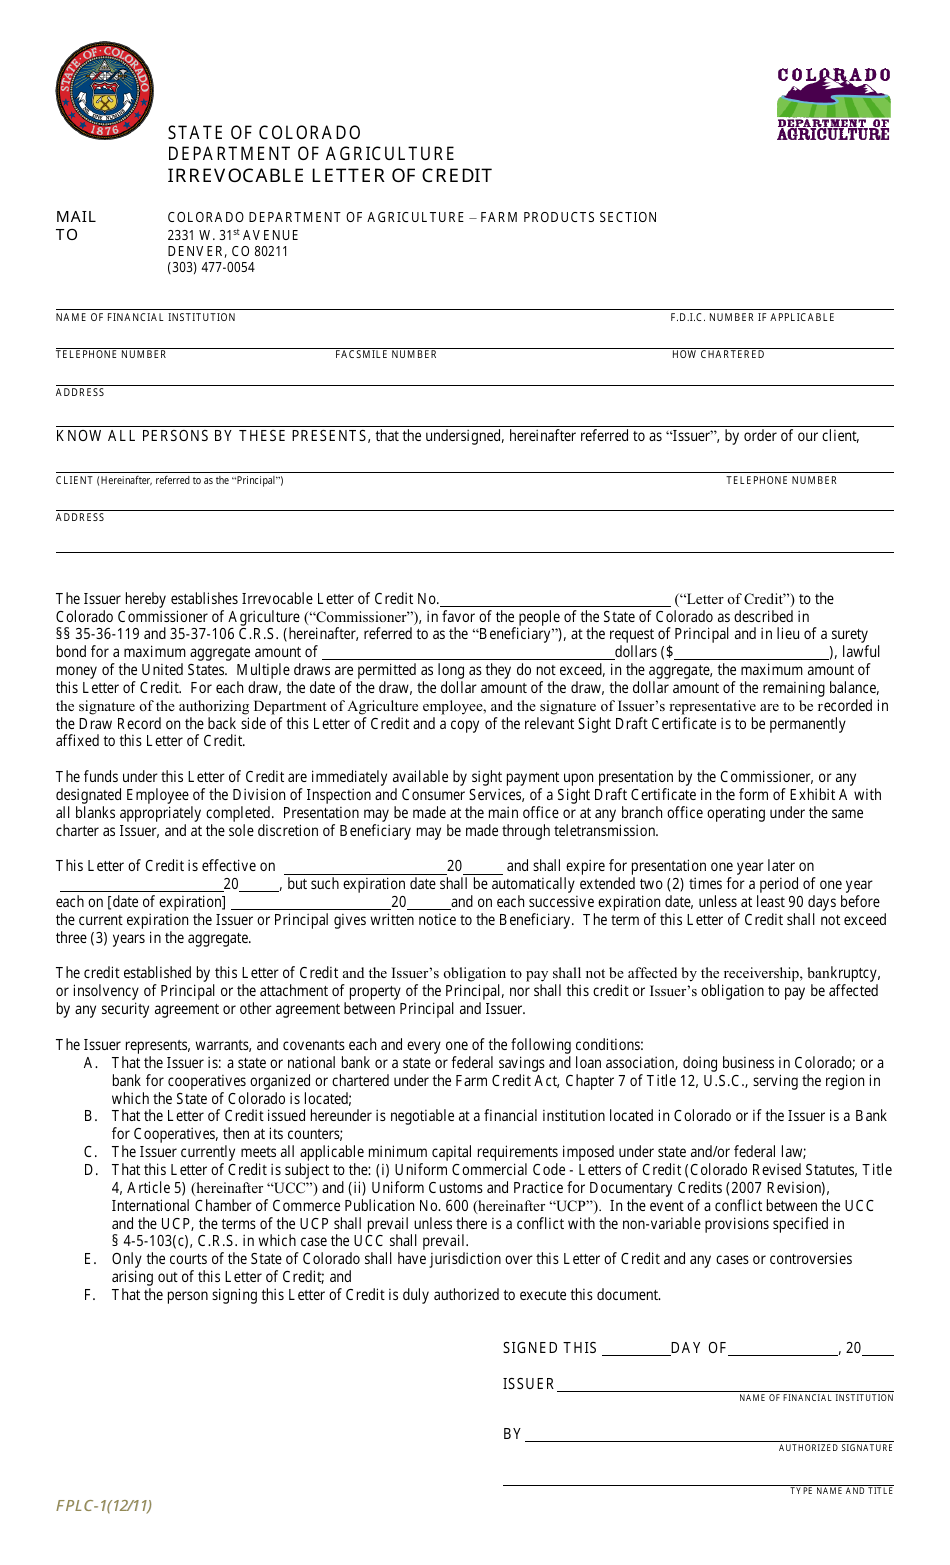 Form FPLC-1 Irrevocable Letter of Credit - Colorado, Page 1